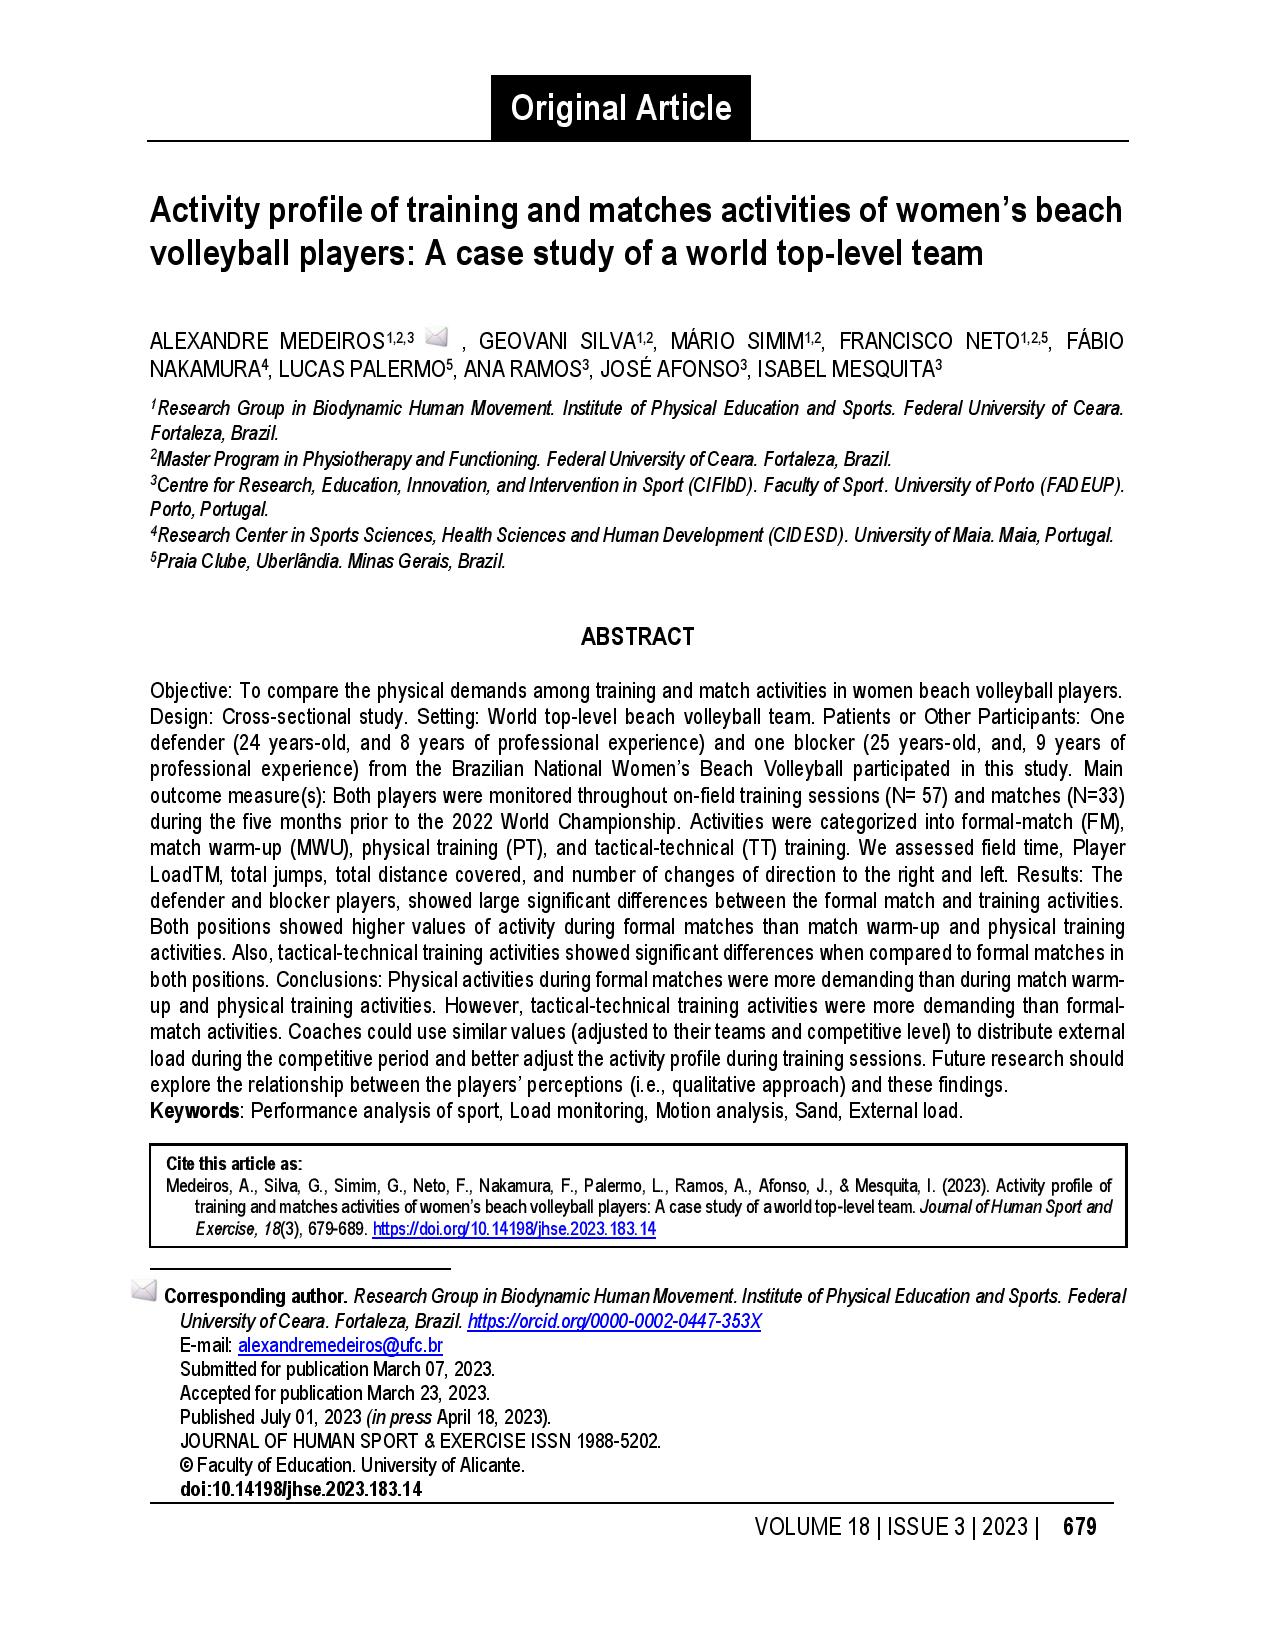 Activity profile of training and matches activities of women’s beach volleyball players: A case study of a world top-level team